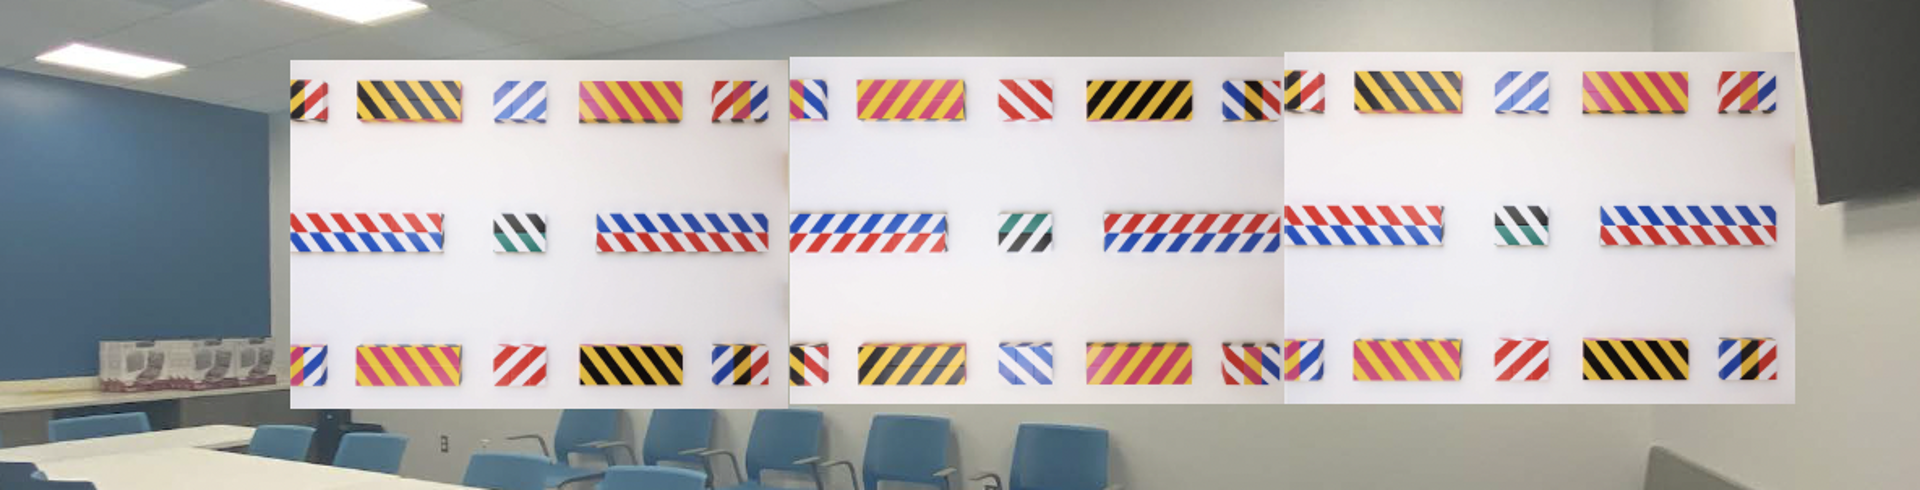 Safety Tape Series Installation by Christopher Paul Dean